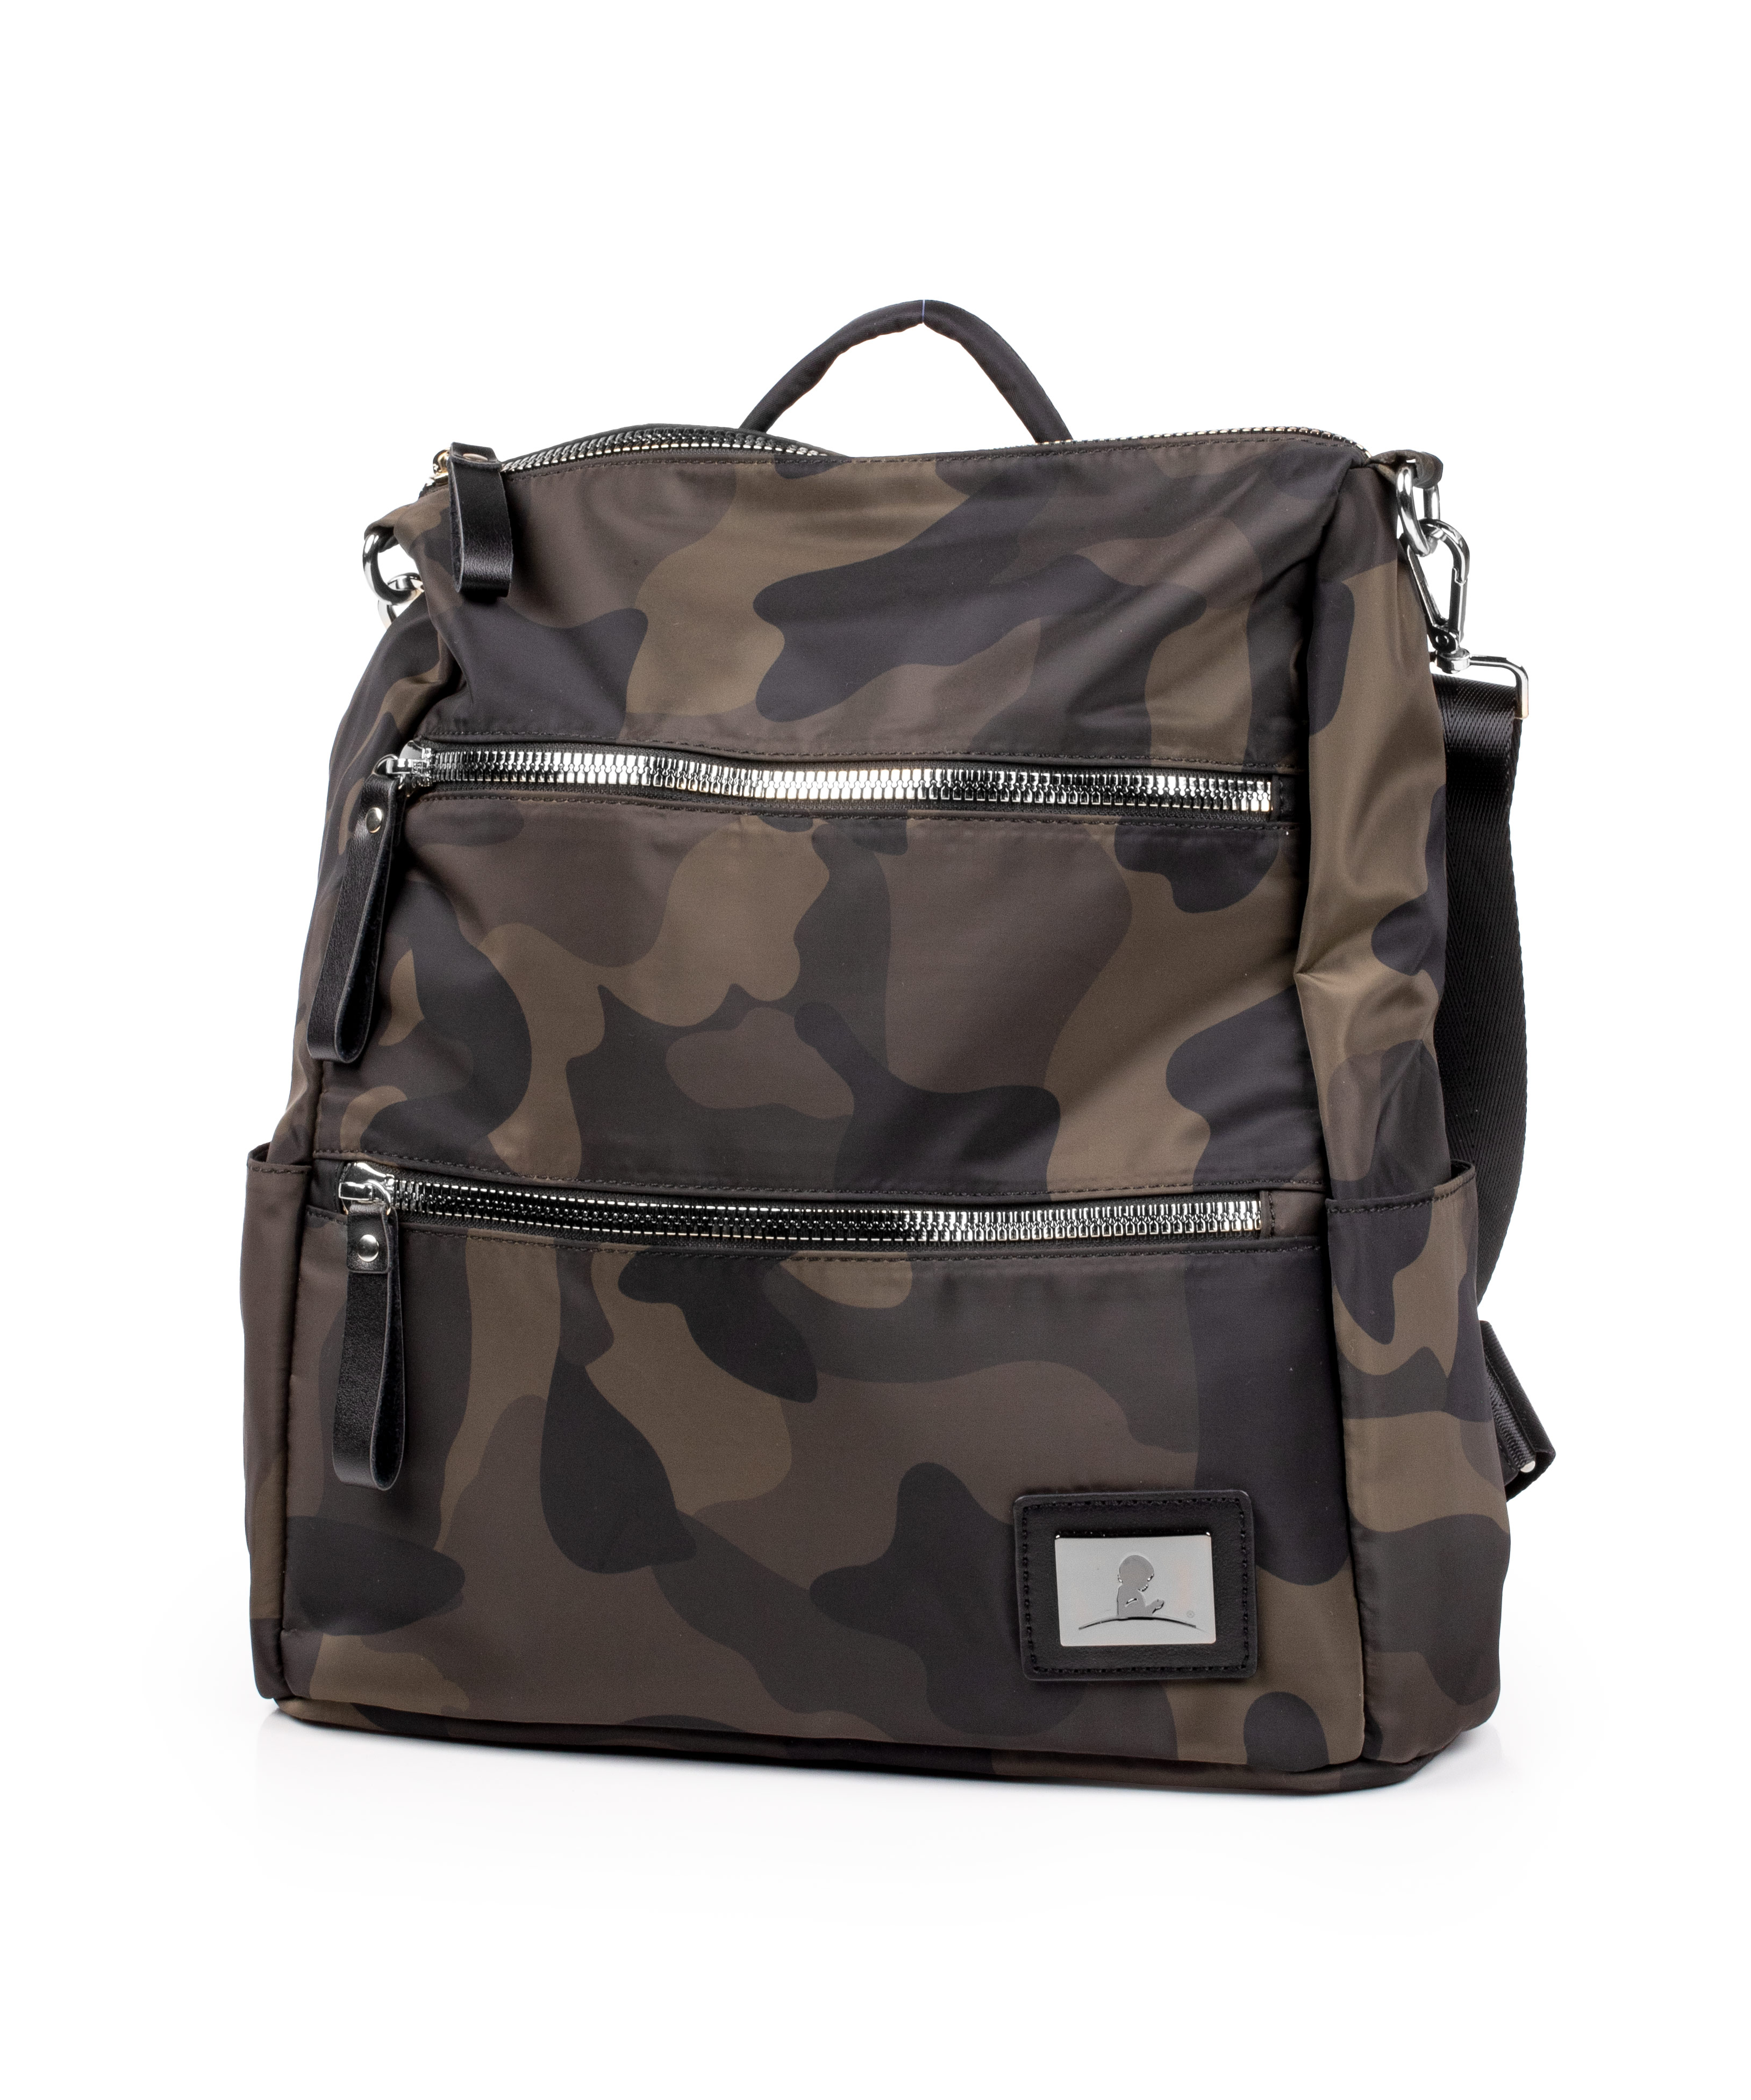 Camouflage Tote Bag Backpack